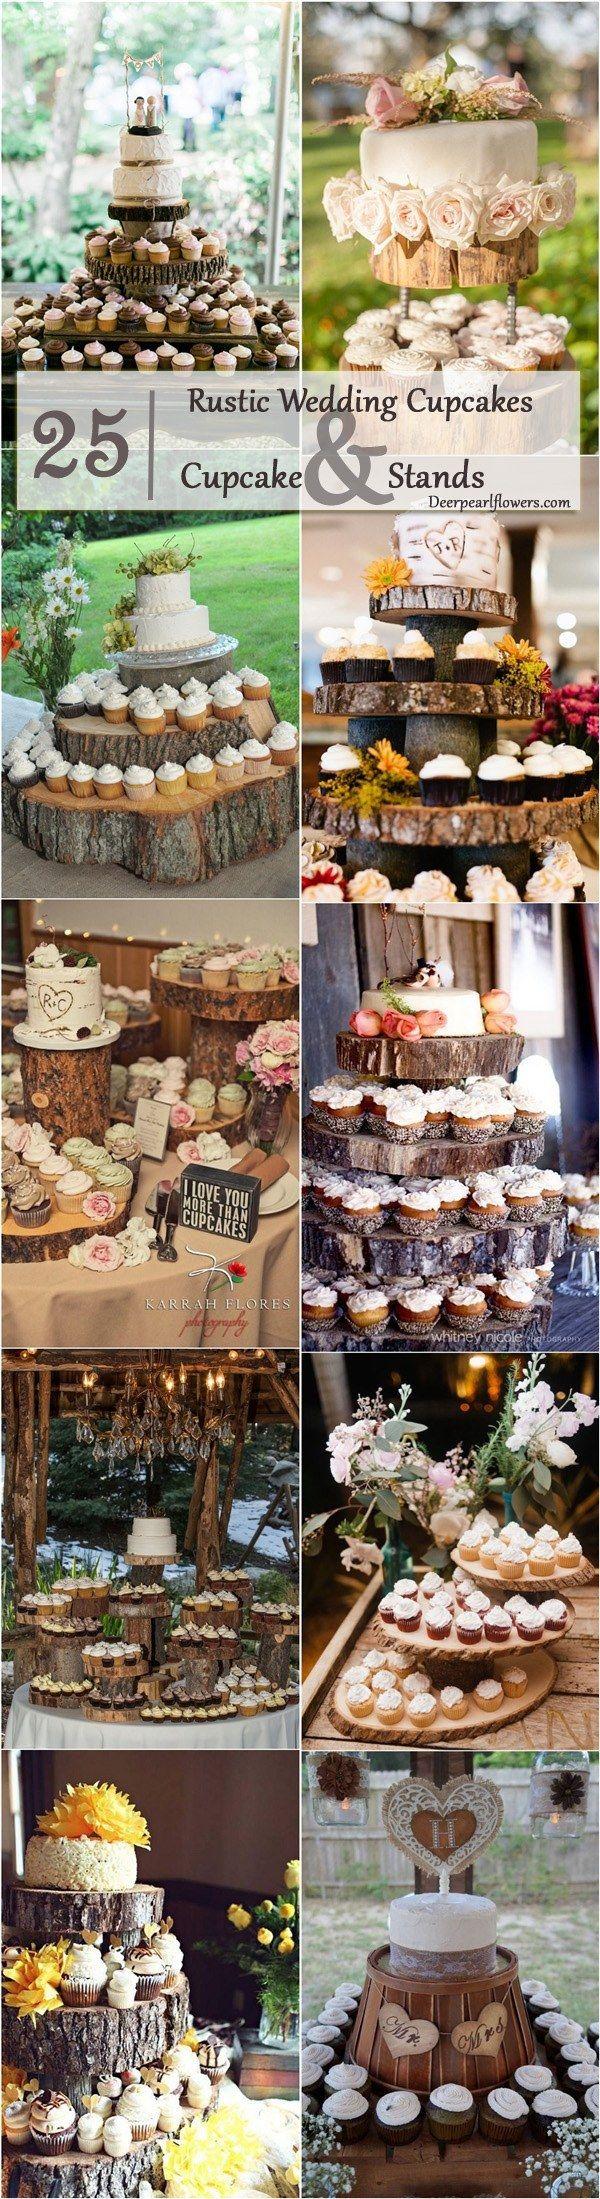 Mariage - 25 Amazing Rustic Wedding Cupcakes & Stands